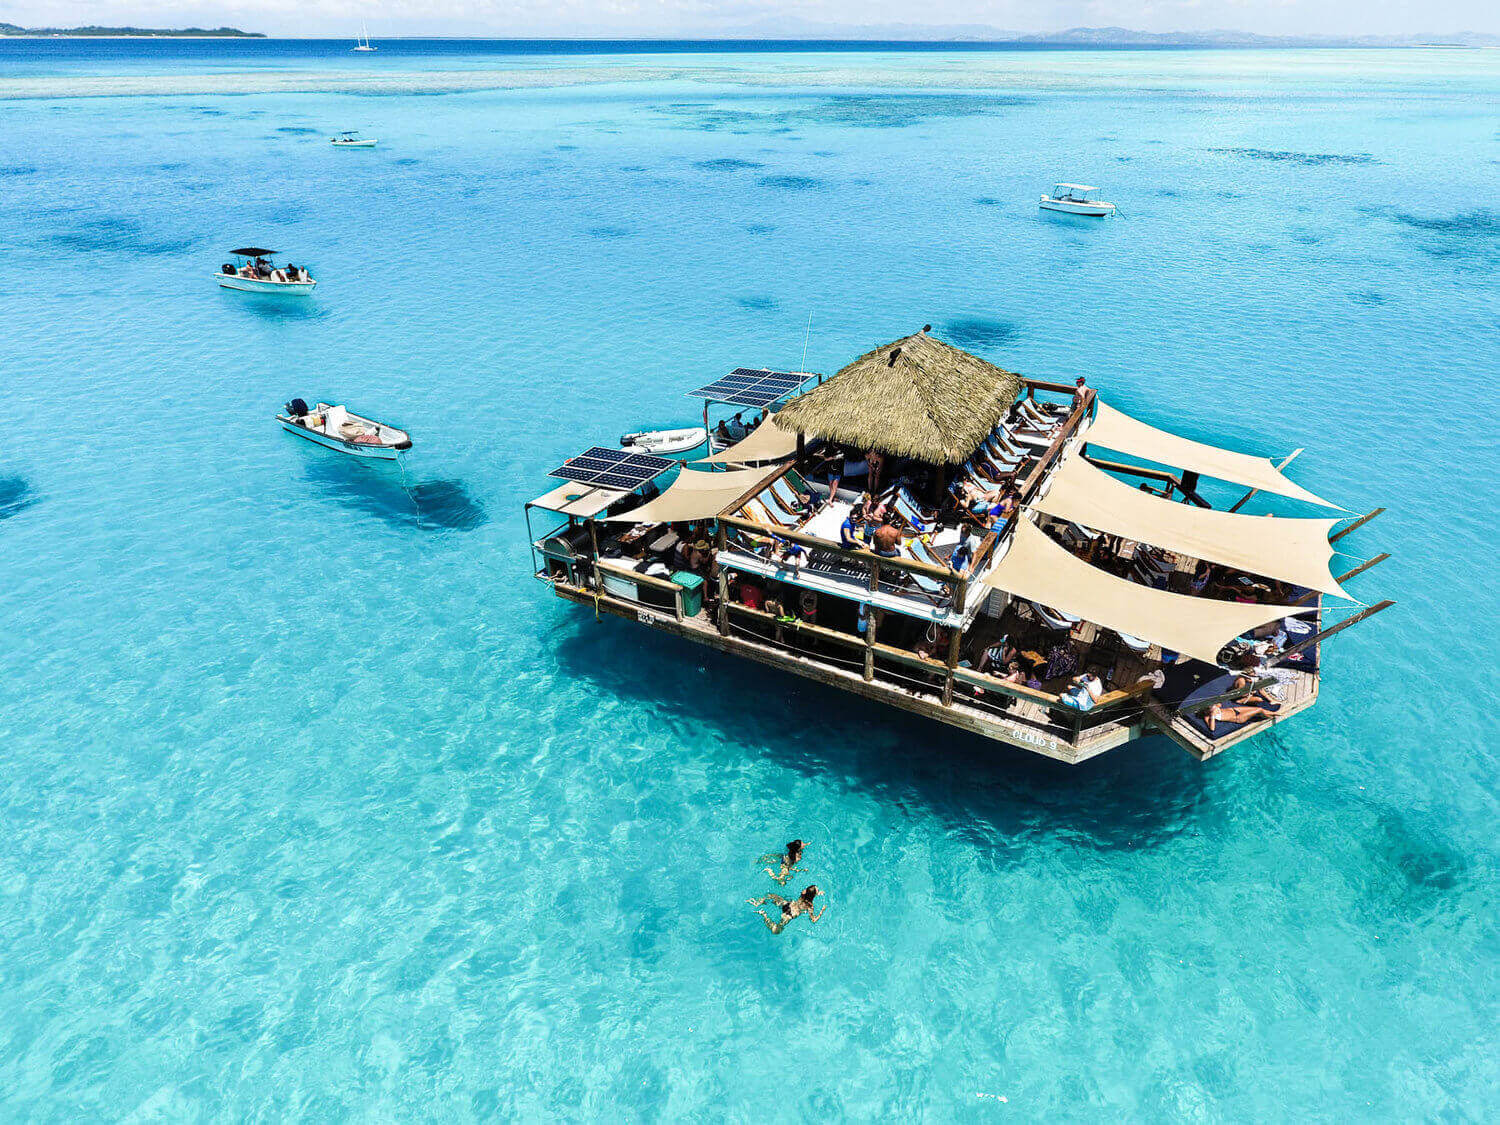 Cloud 9, floating bar off Nadi, on crystal clear blue waters